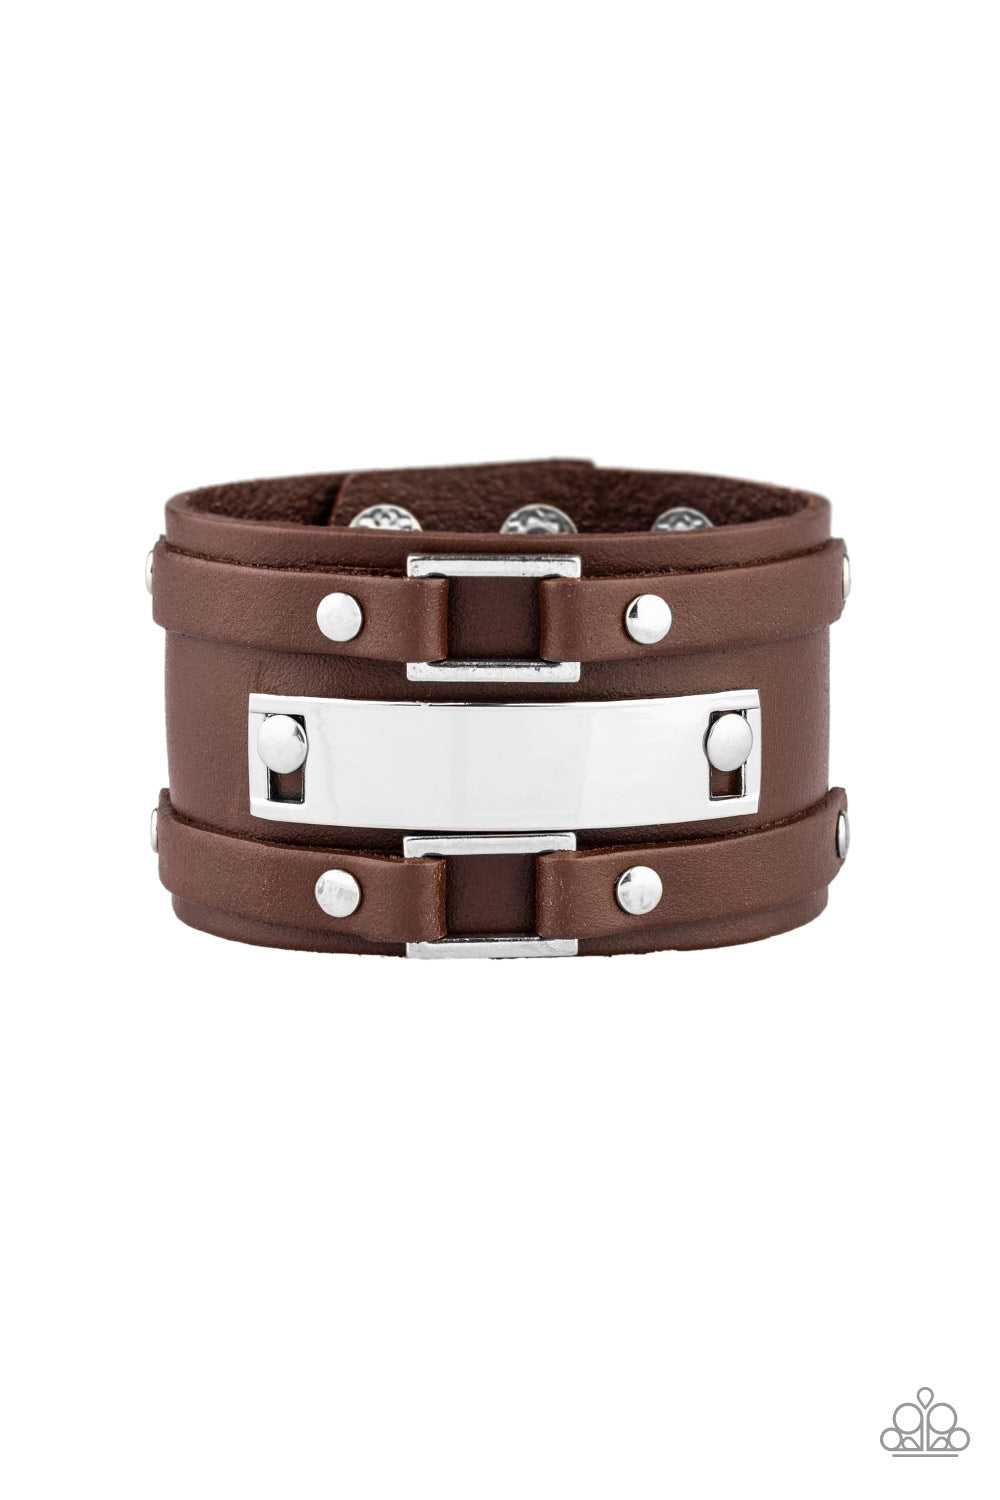 &lt;P&gt;A collection of leather pieces and shiny silver frames are studded in place across the front of a thick leather band, creating an abstract buckle. Features an adjustable snap closure.
&lt;/P&gt;  

&lt;P&gt; &lt;I&gt;Sold as one individual bracelet. &lt;/I&gt;&lt;/P&gt;

&lt;img src=\&quot;https://d9b54x484lq62.cloudfront.net/paparazzi/shopping/images/517_tag150x115_1.png\&quot; alt=\&quot;New Kit\&quot; align=\&quot;middle\&quot; height=\&quot;50\&quot; width=\&quot;50\&quot;/&gt;